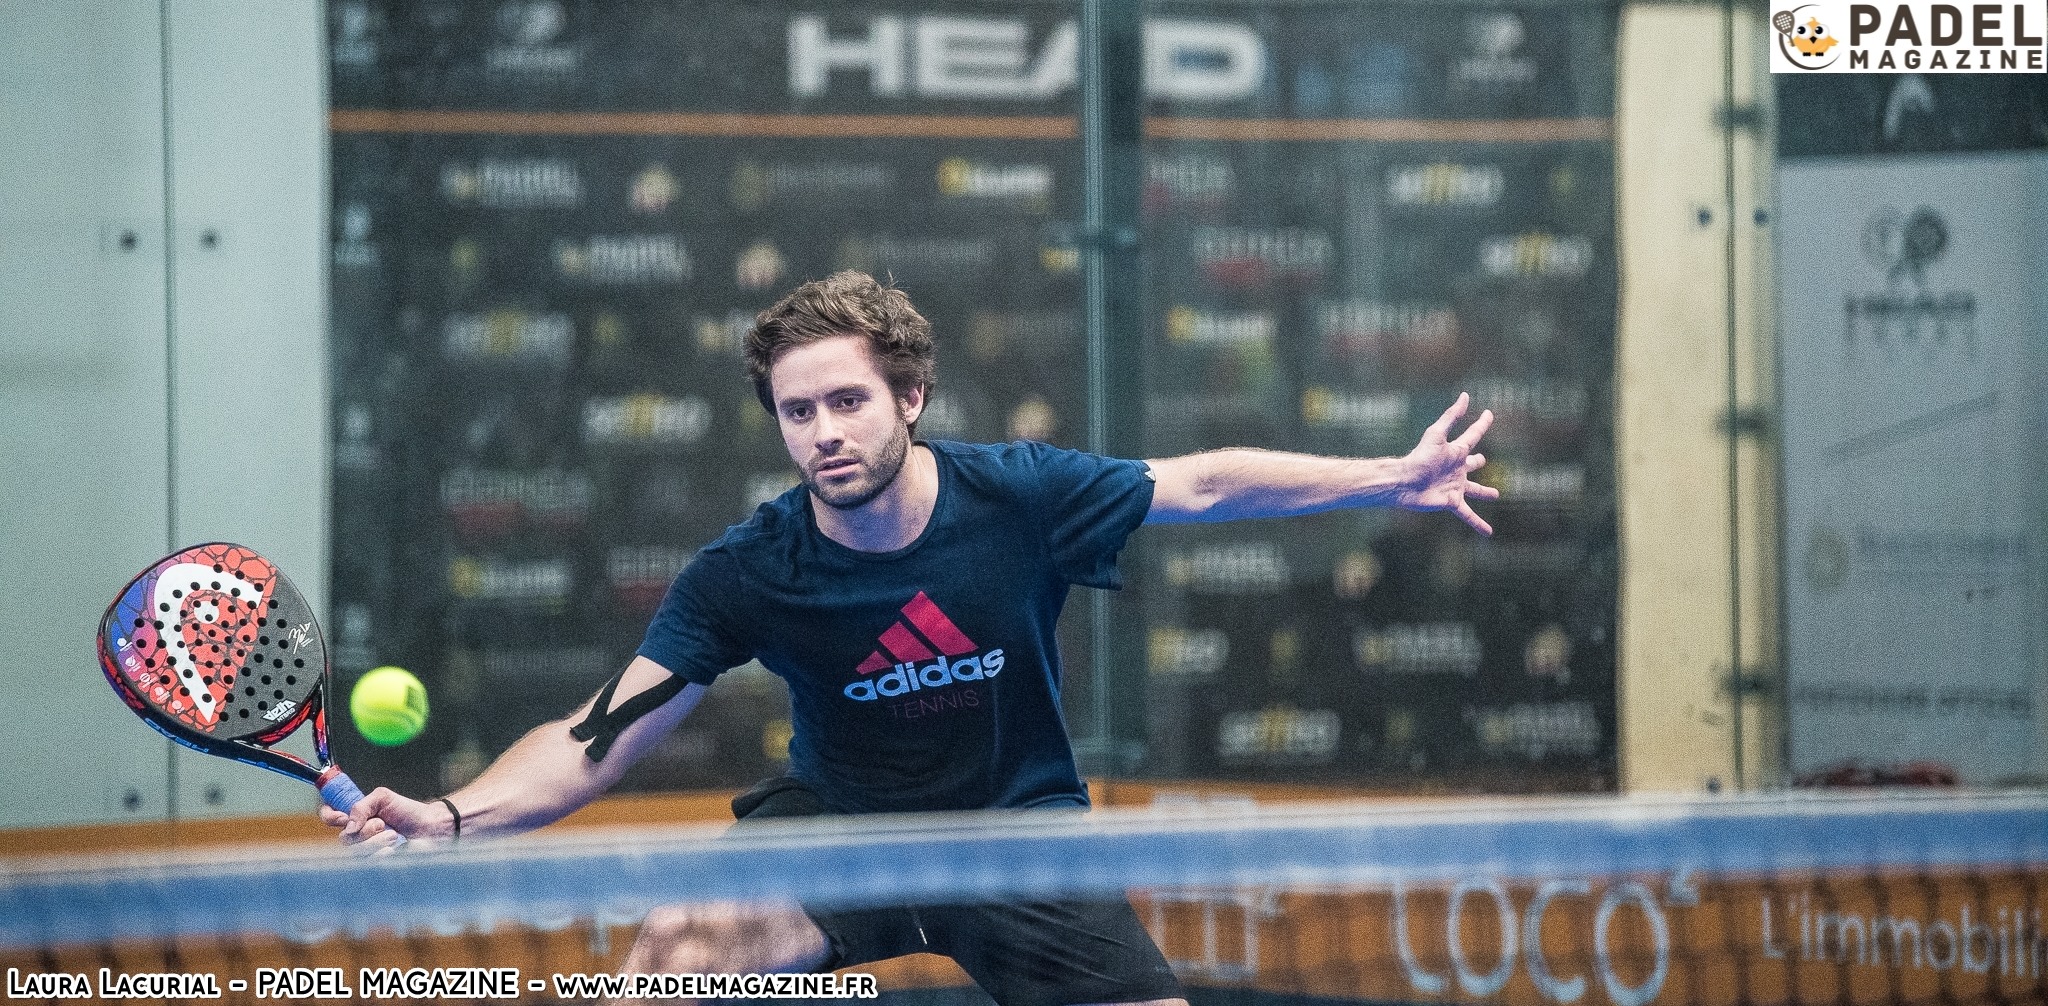 Back on the matches of Head Padel Open218 - Toulouse Padel Club